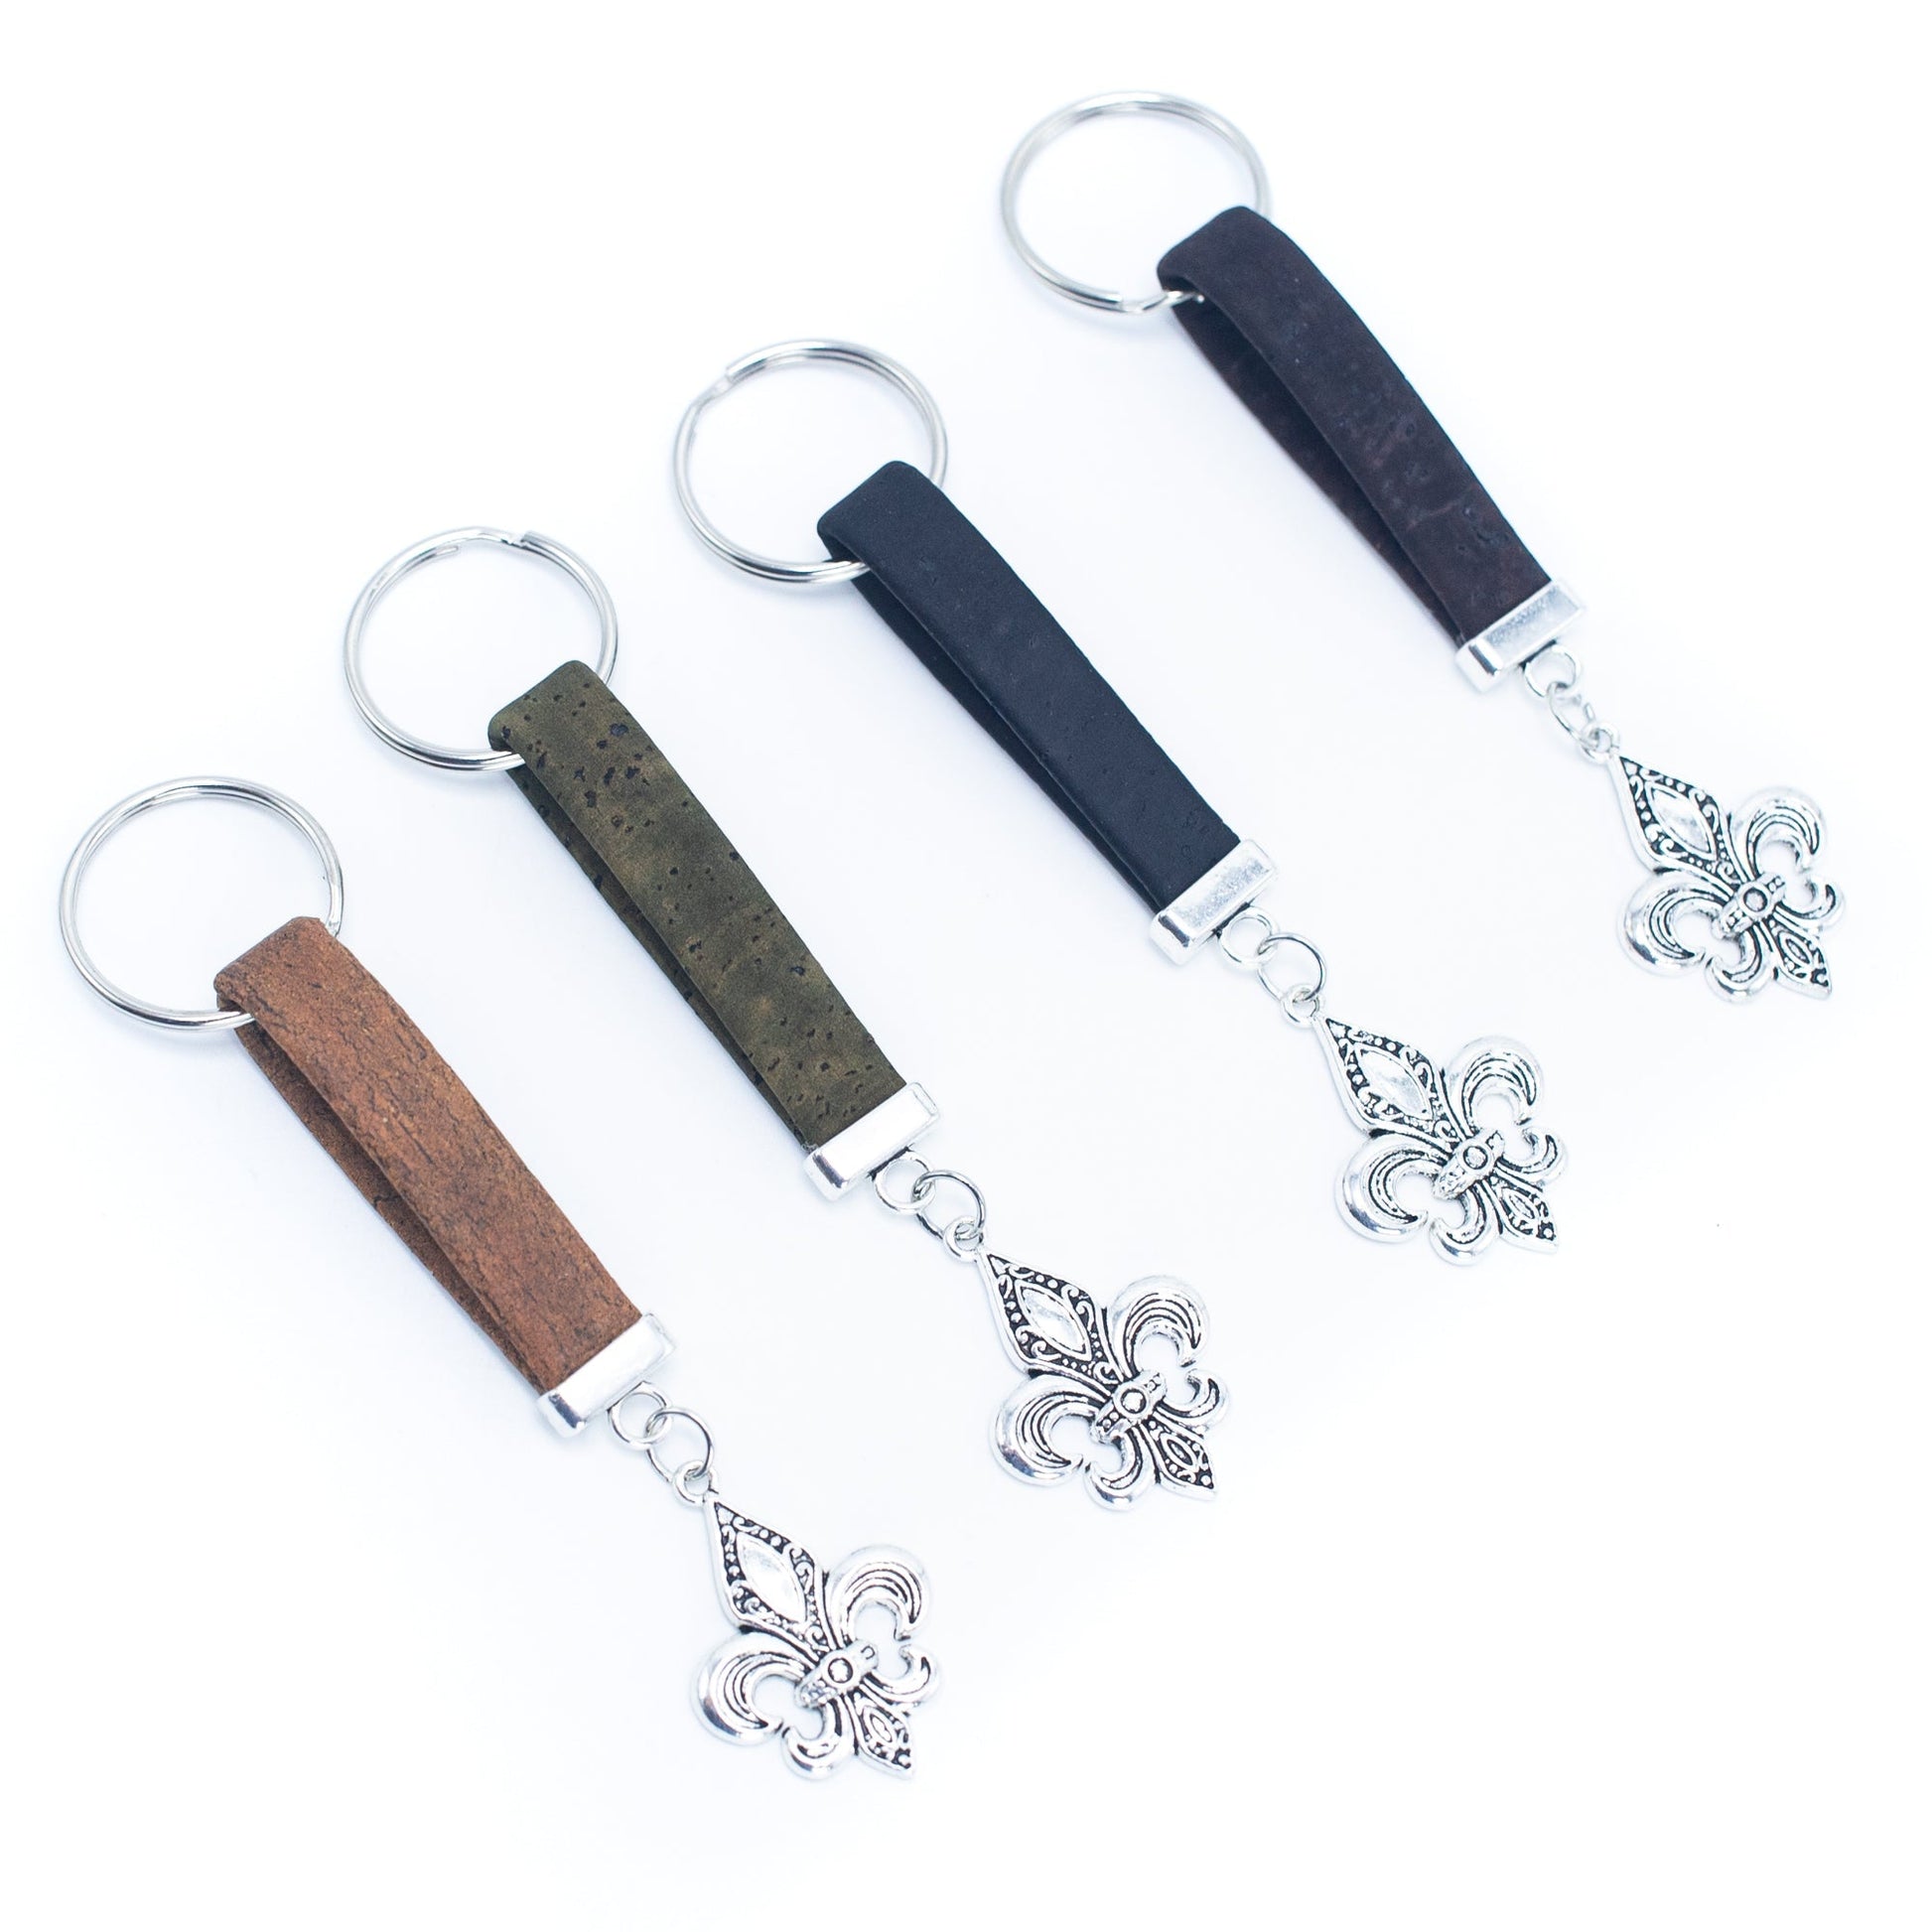 Spear Pendant Colorful Cork Handmade Keychain | THE CORK COLLECTION